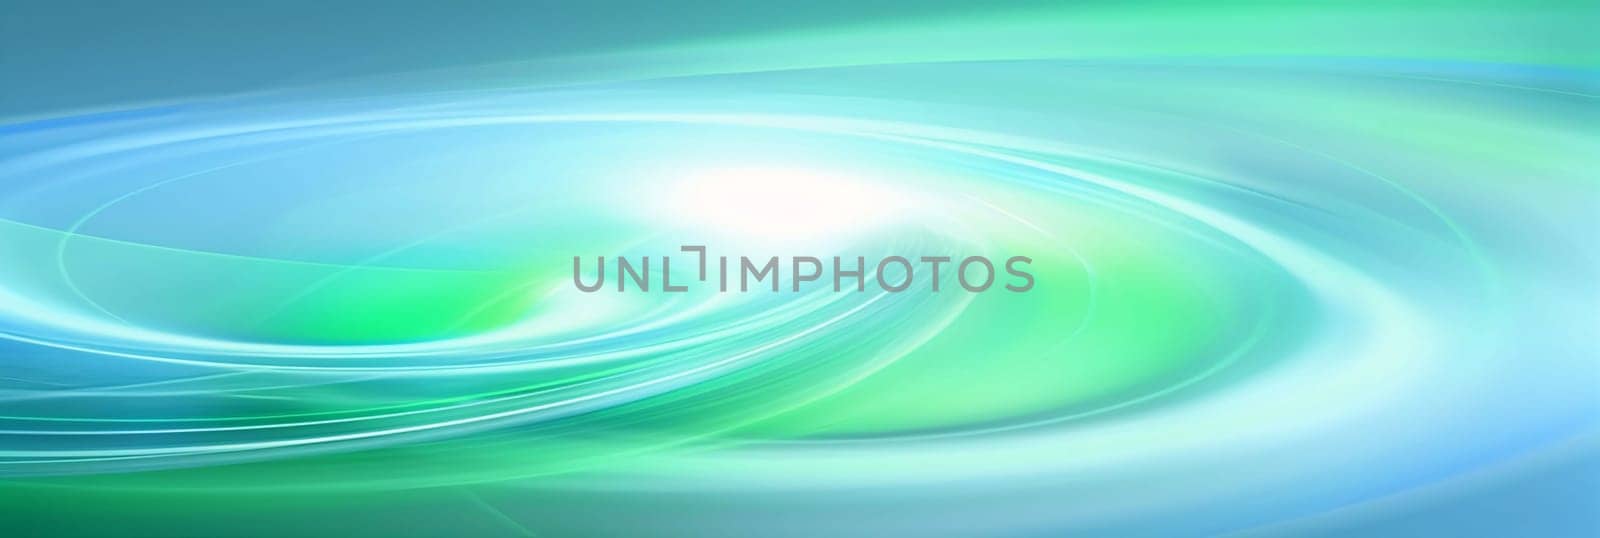 Abstract blue and green background with smooth lines. Vector illustration for your design. by ThemesS